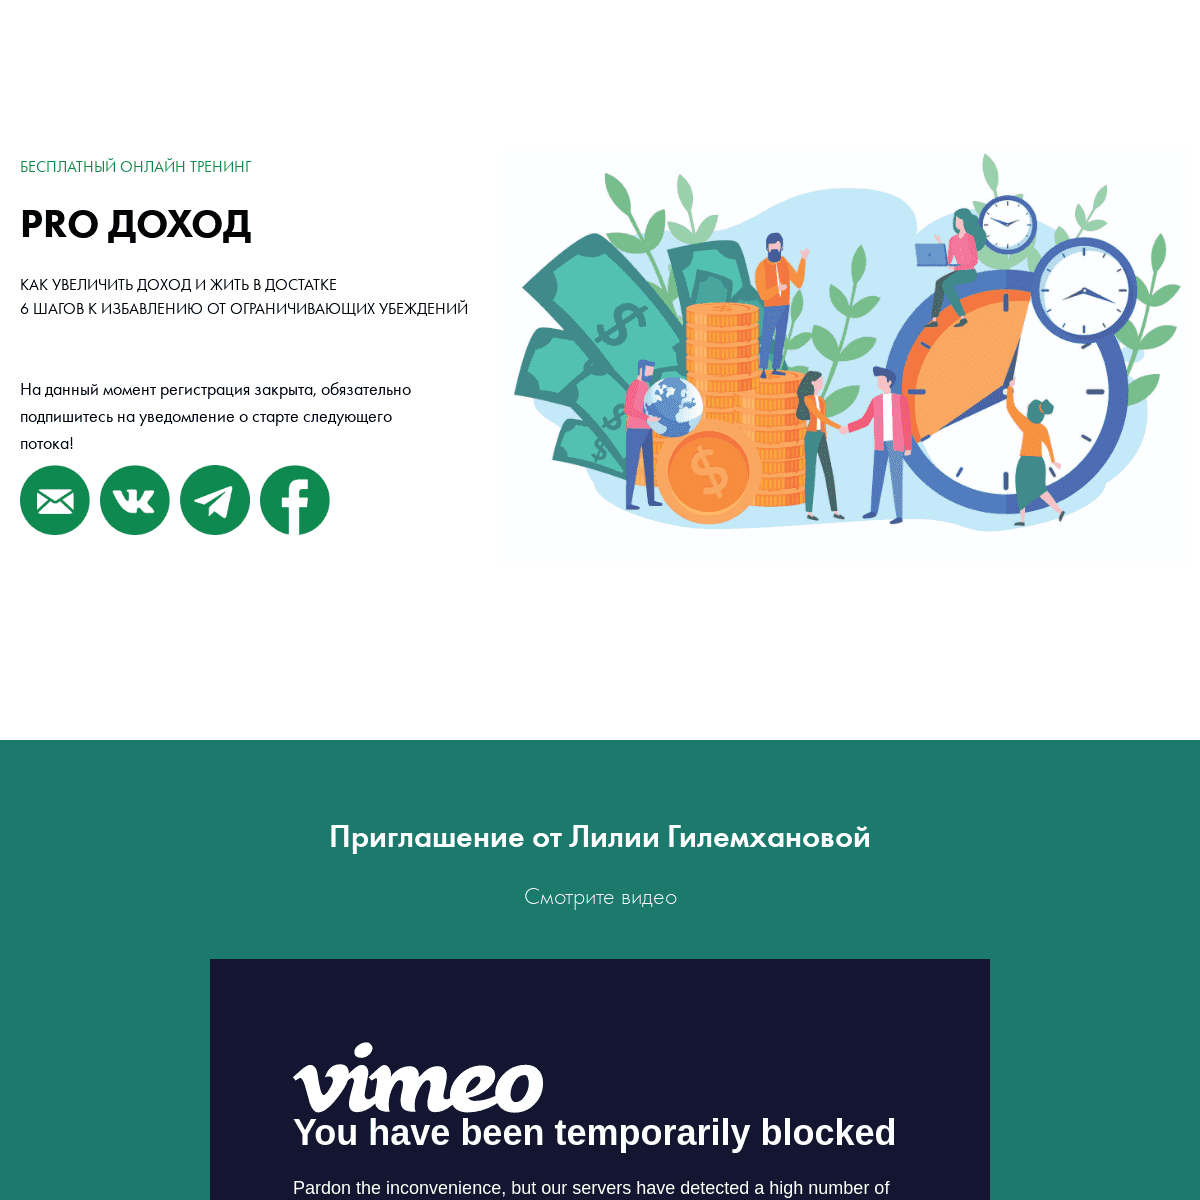 A complete backup of prodohod.pro